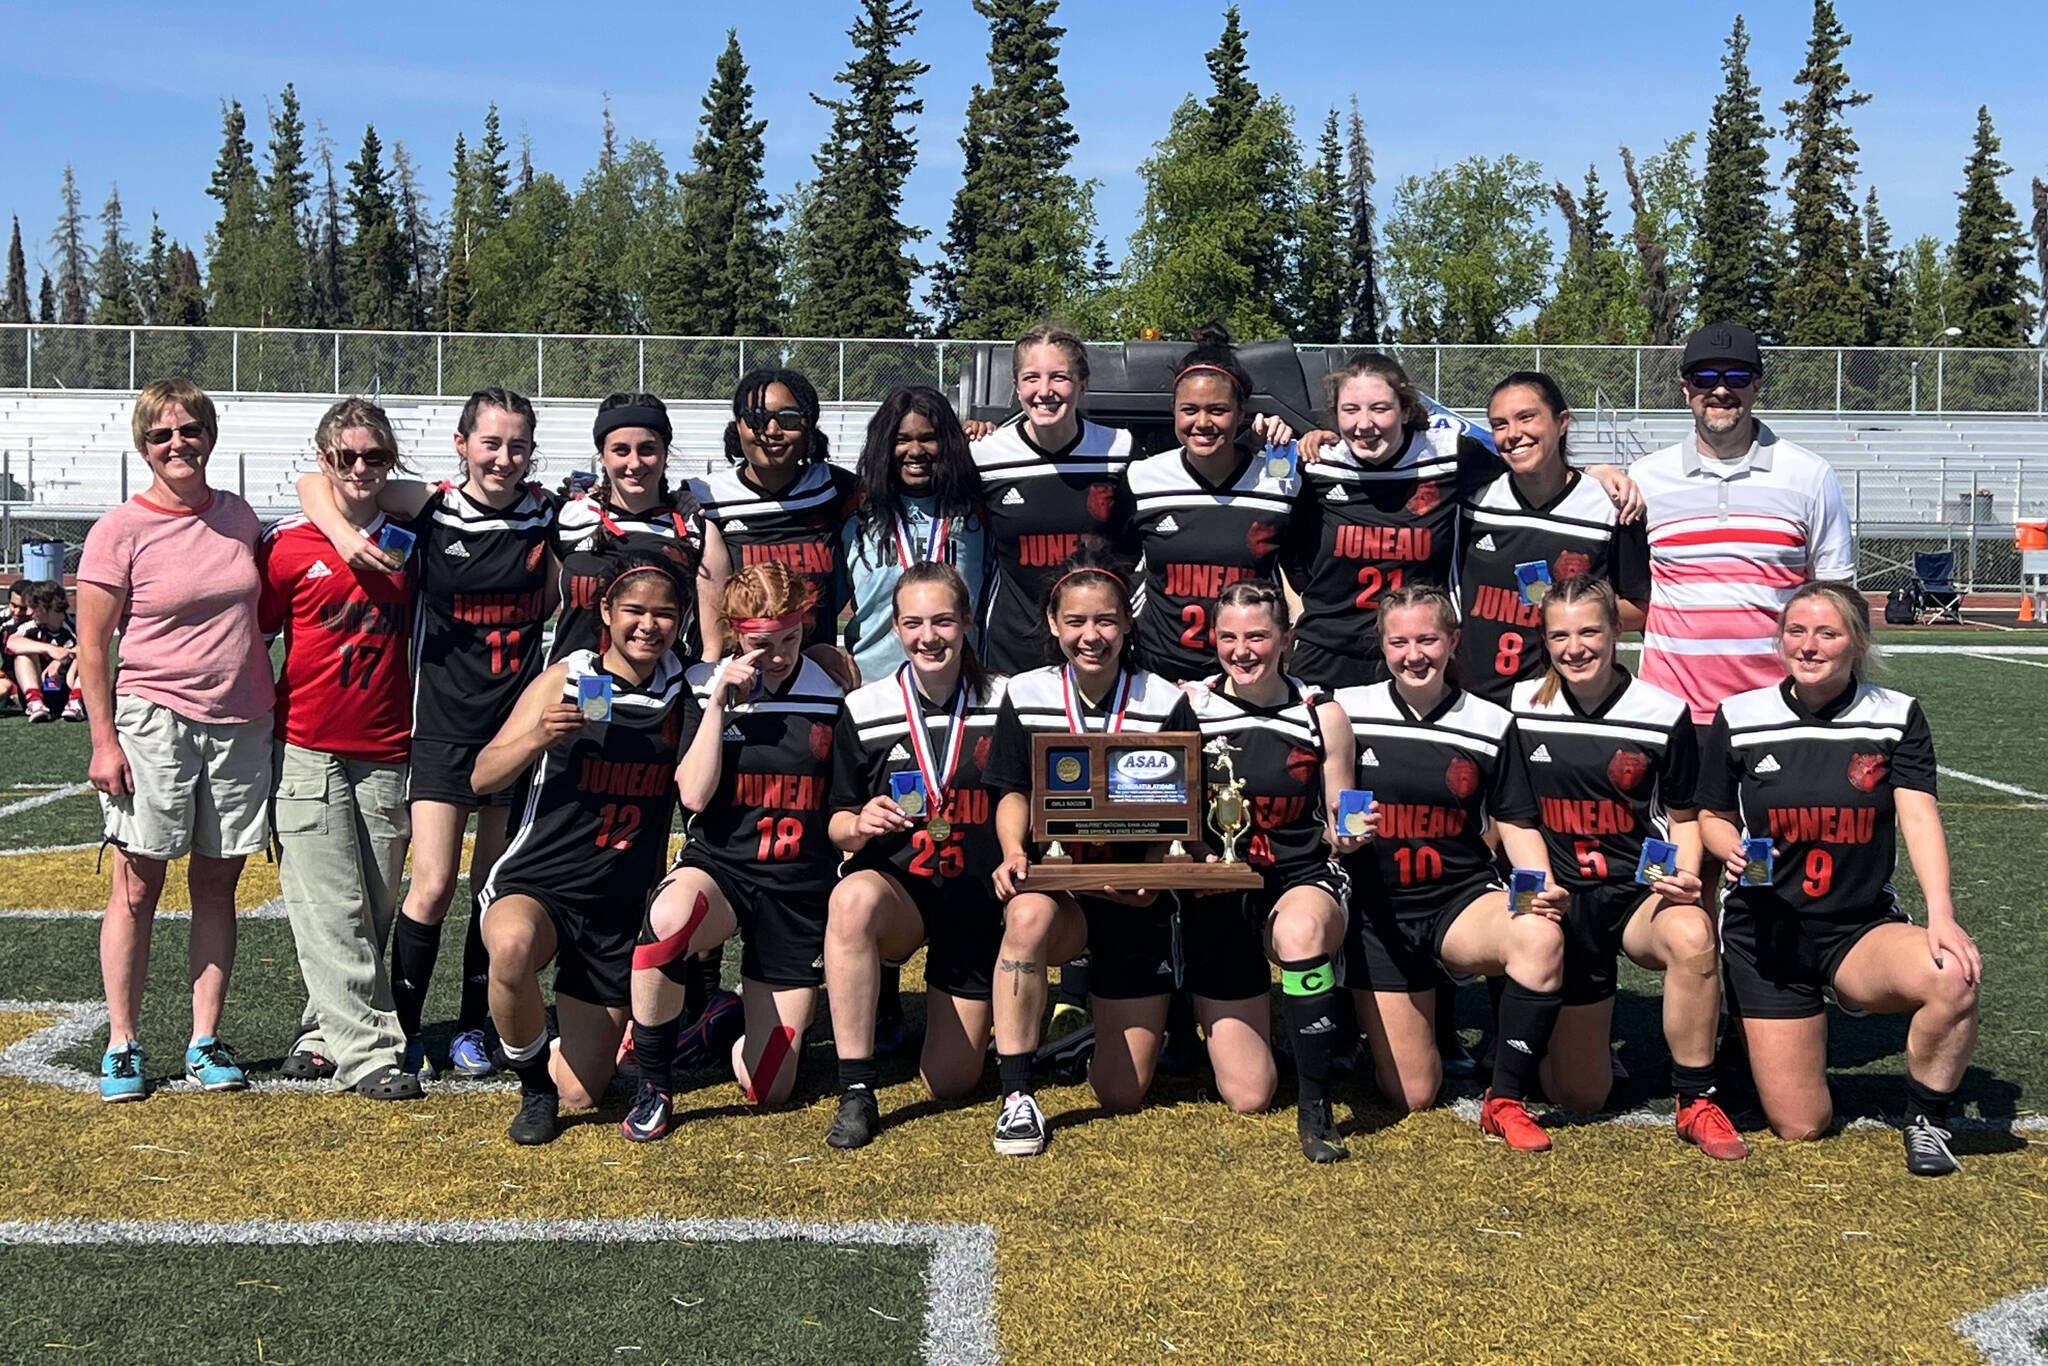 The JDHS girls soccer team swept to victory in the DII state championship on May 28, 2022 without a single goal being scored against them in the tournament. (Courtesy photo / Myra Pugh)